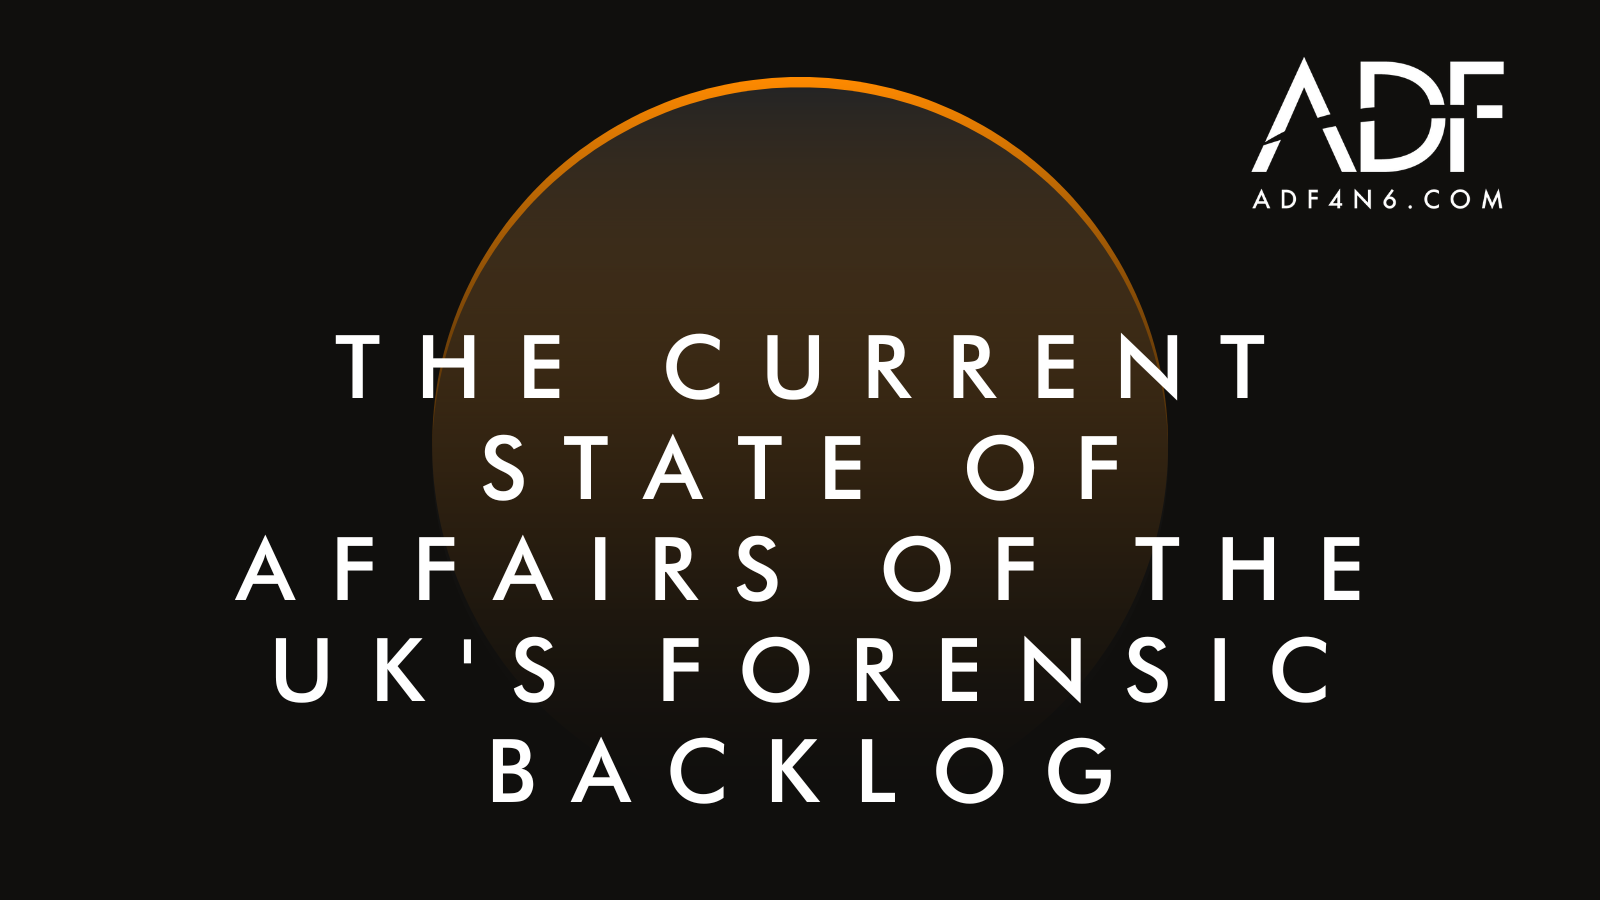 The Current State of Affairs of the UK's Forensic Backlog